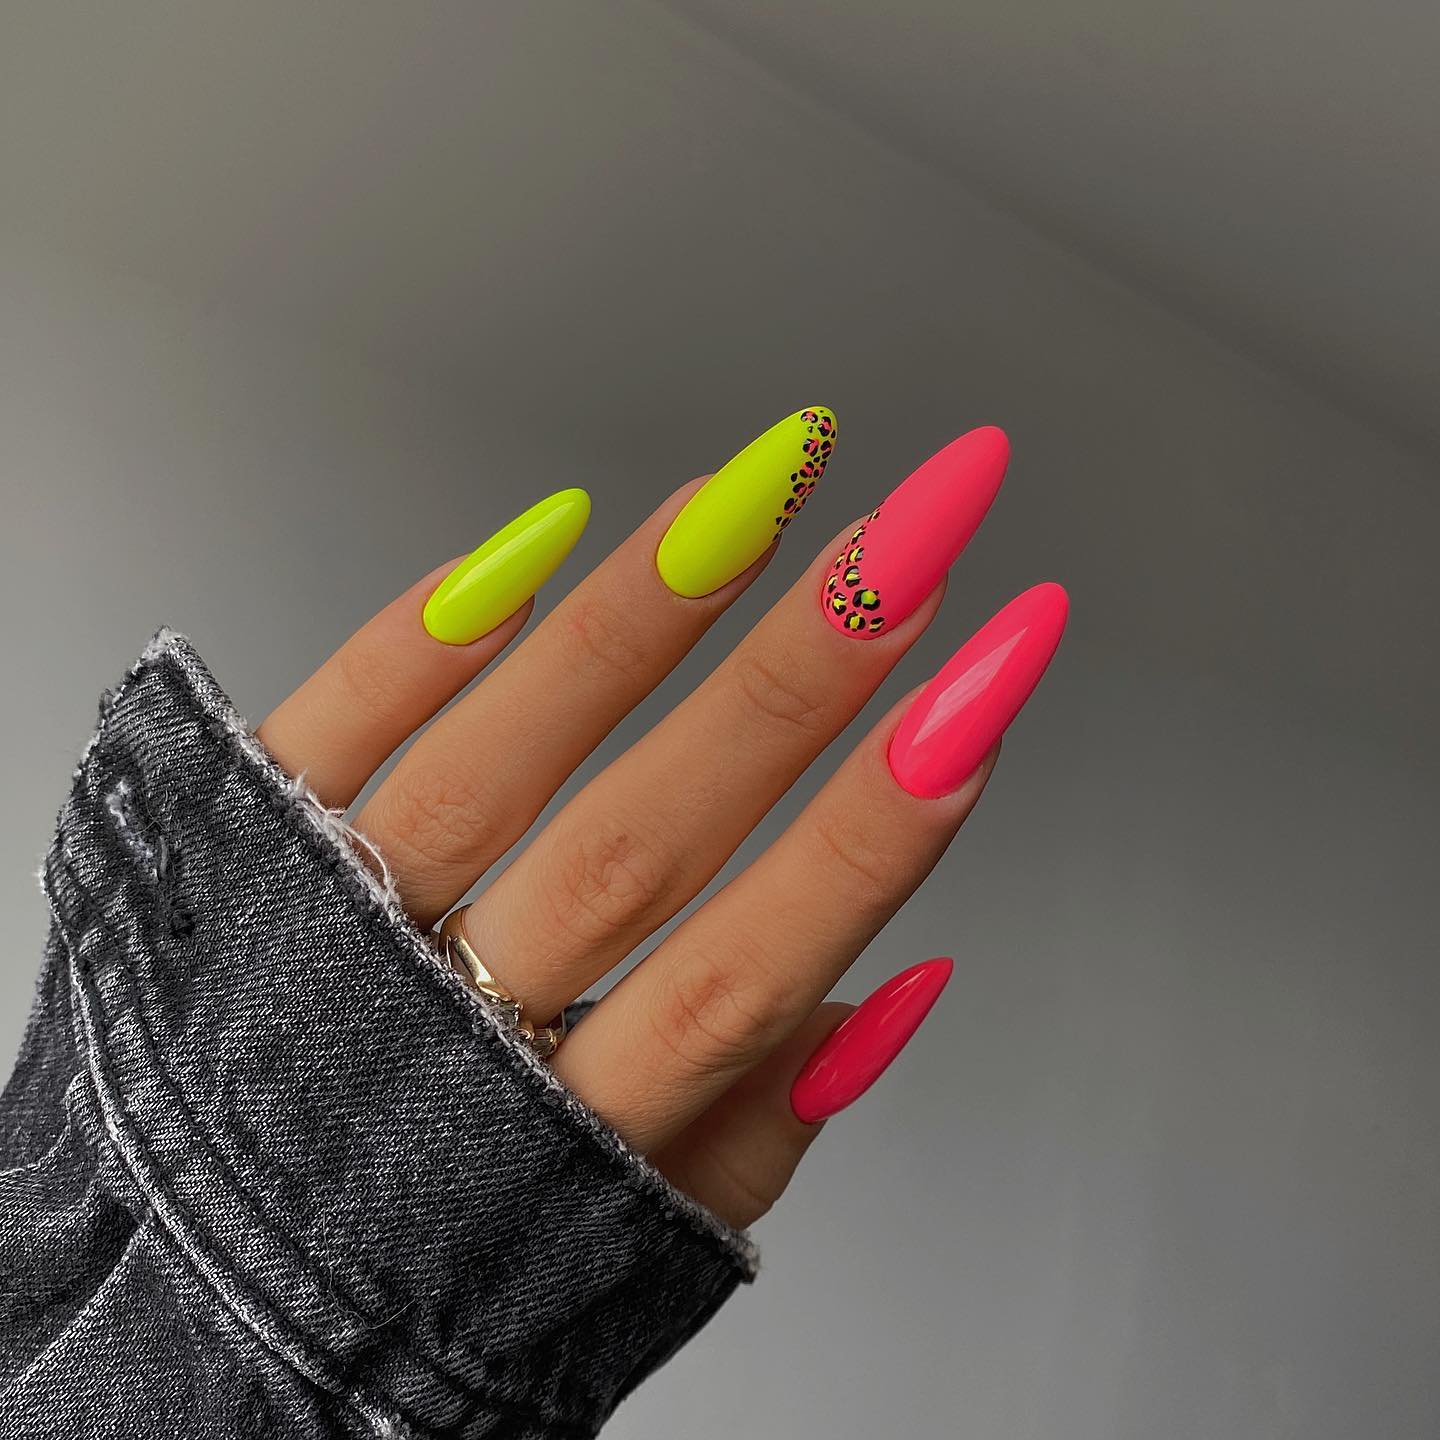  To feel the summer vibe, yellow and pink neon colors are the best! As you see, shiny and matte nail polishes are used in one nail design. A little bit of leopard prints are cute to add.